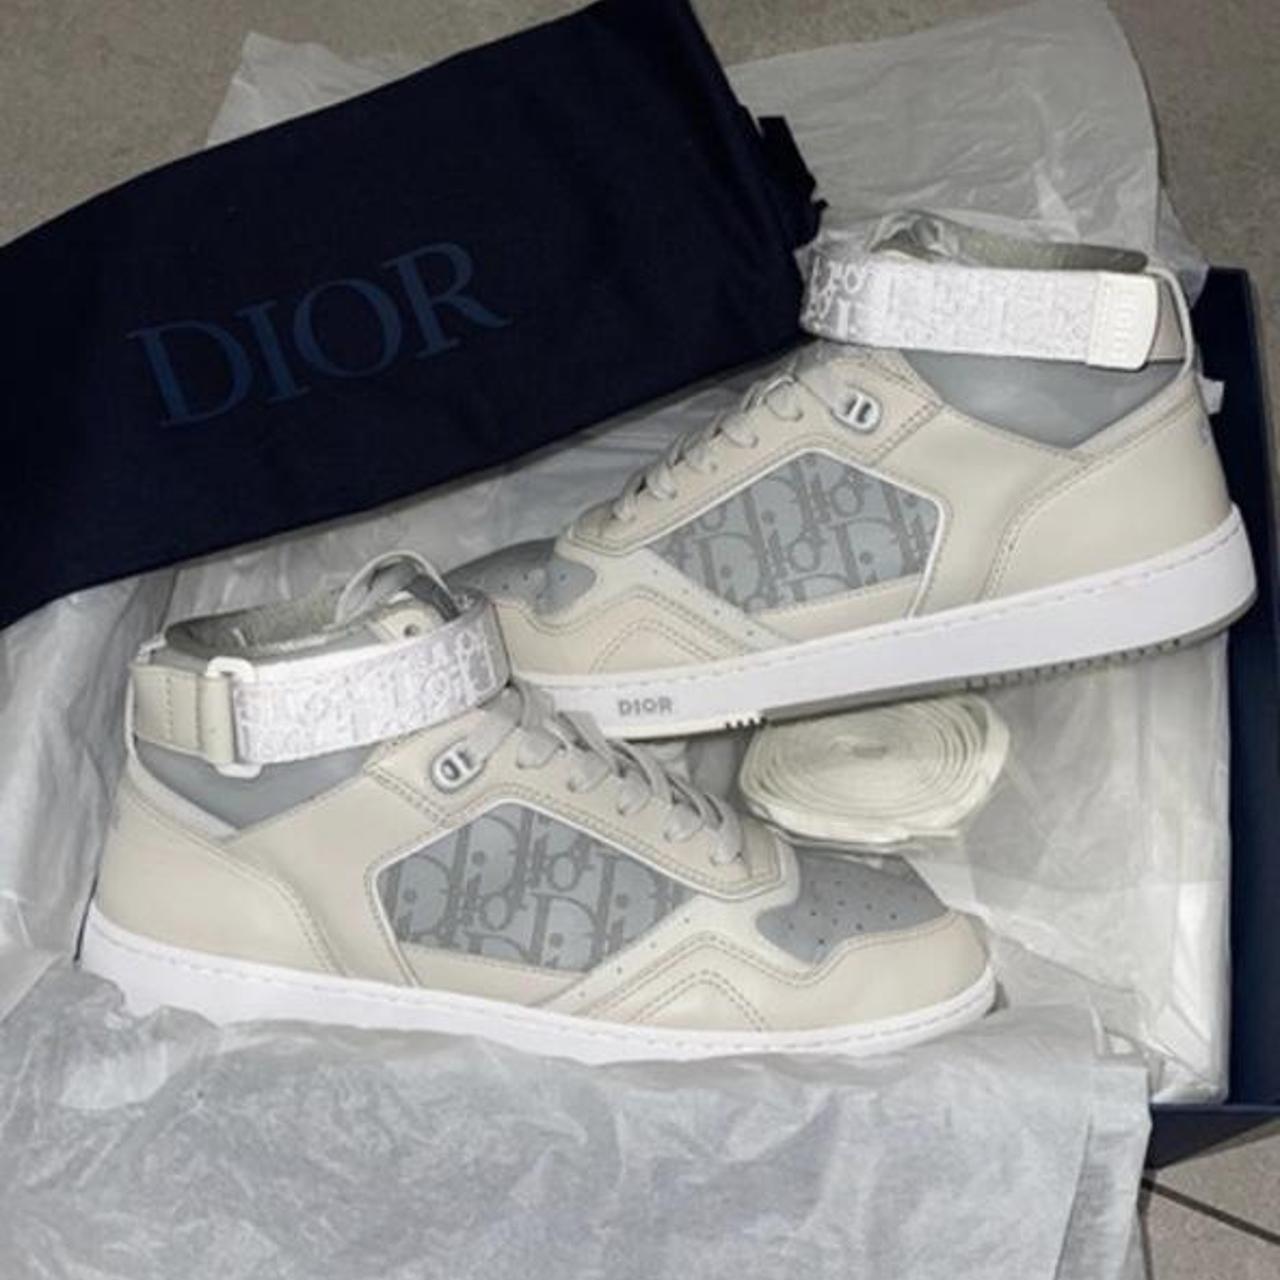 Dior Men's Grey and White Trainers | Depop